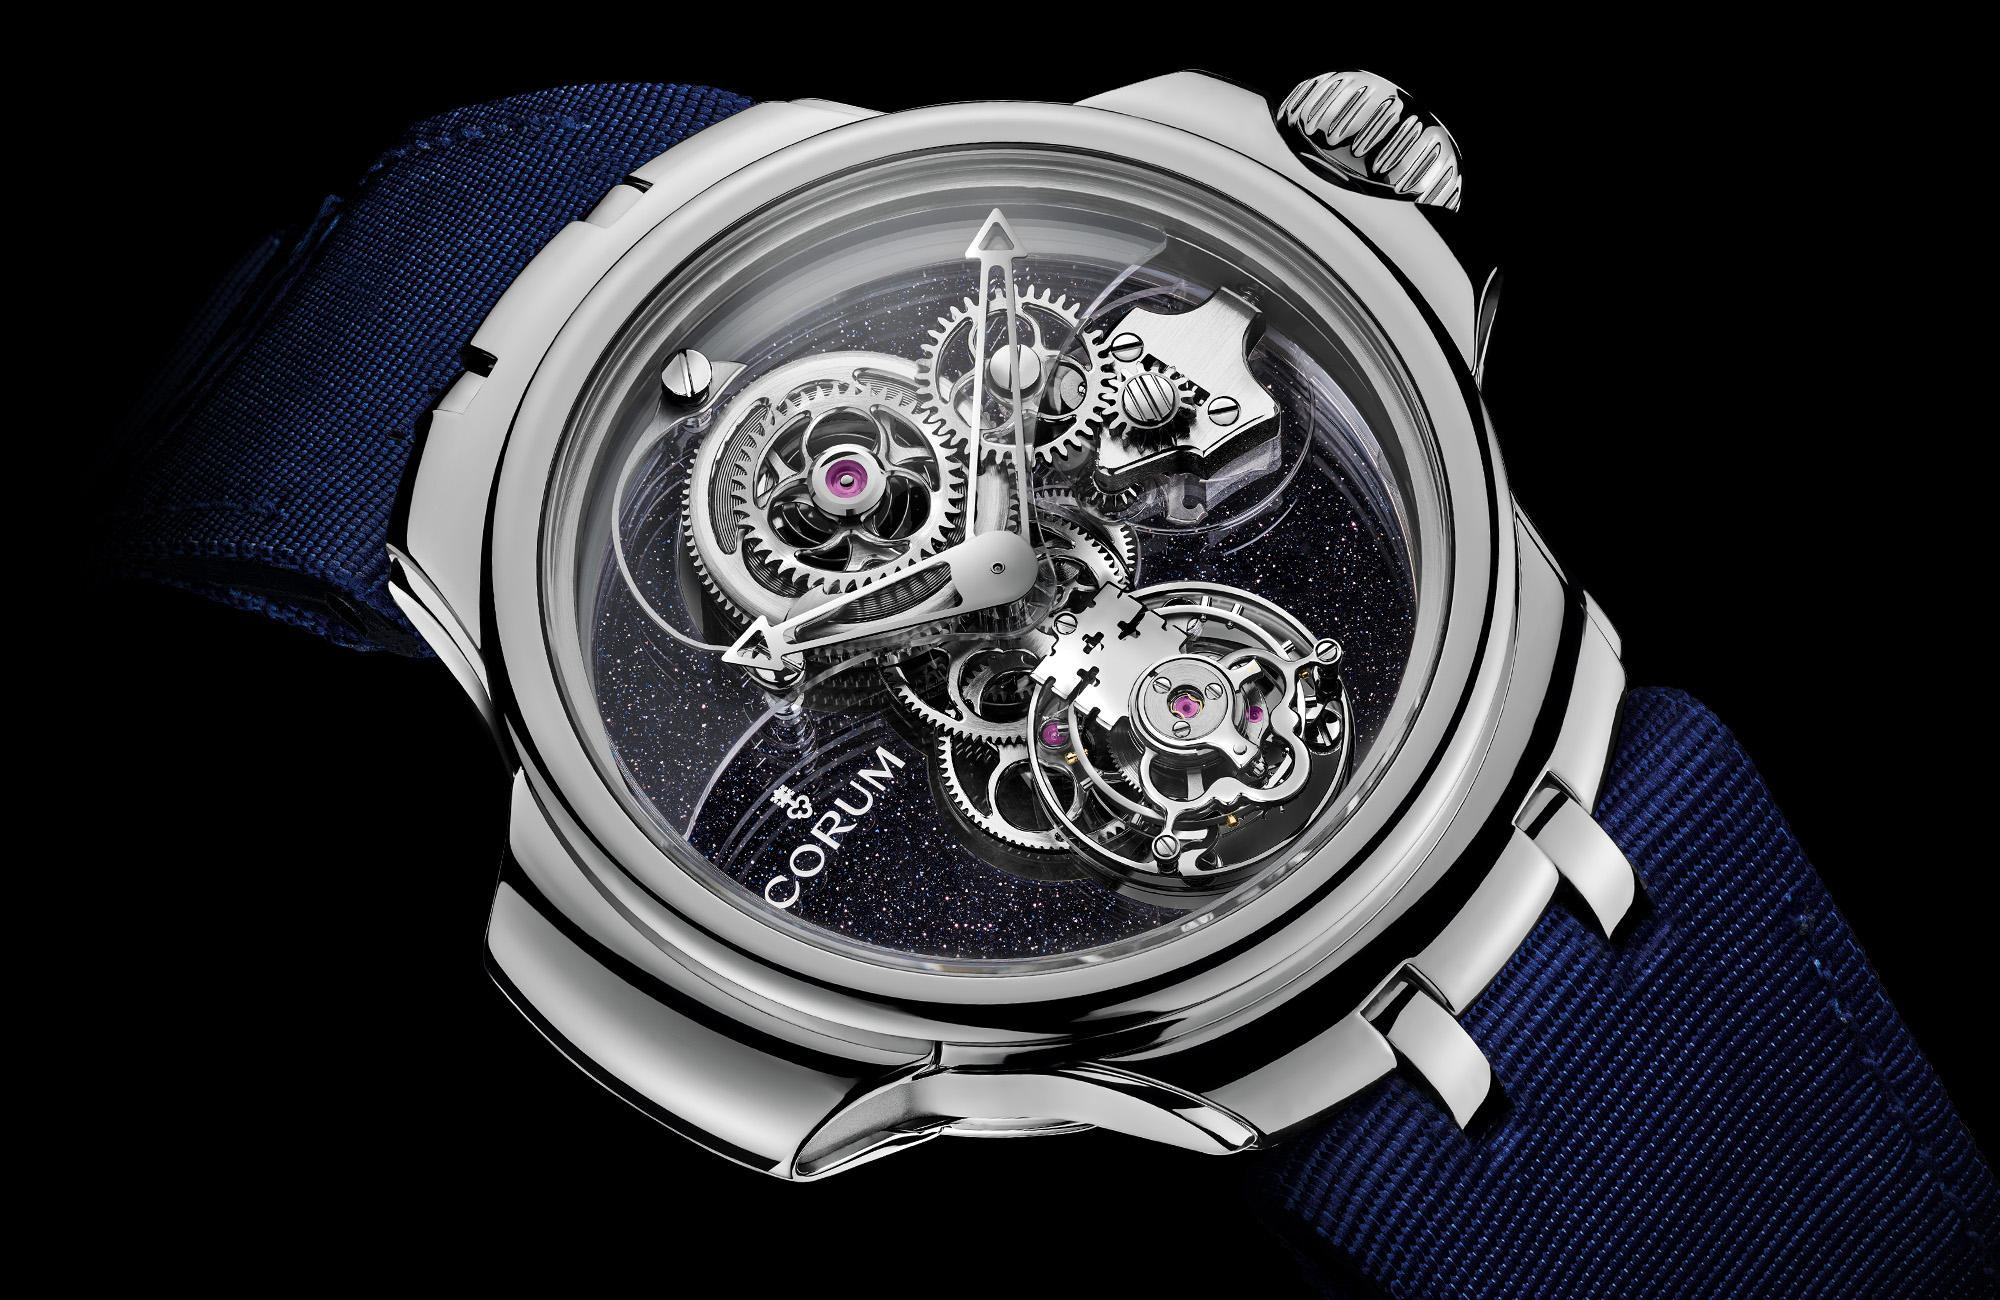 Corum Concept Watch: Combining innovative design and technology